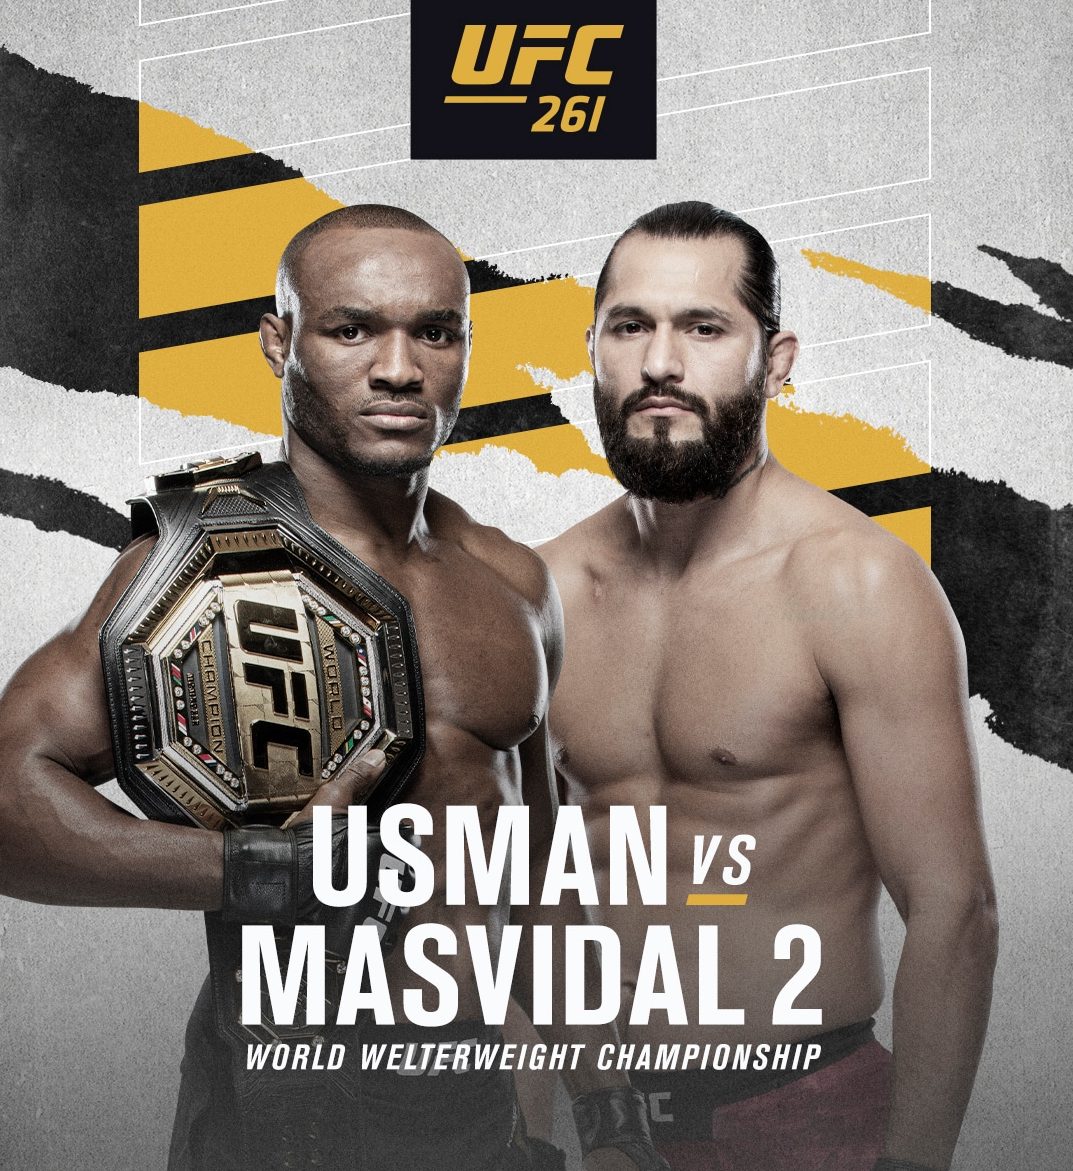 UFC Champion, Usman Gears Up For Fierce Fight Against Masvidal On Saturday